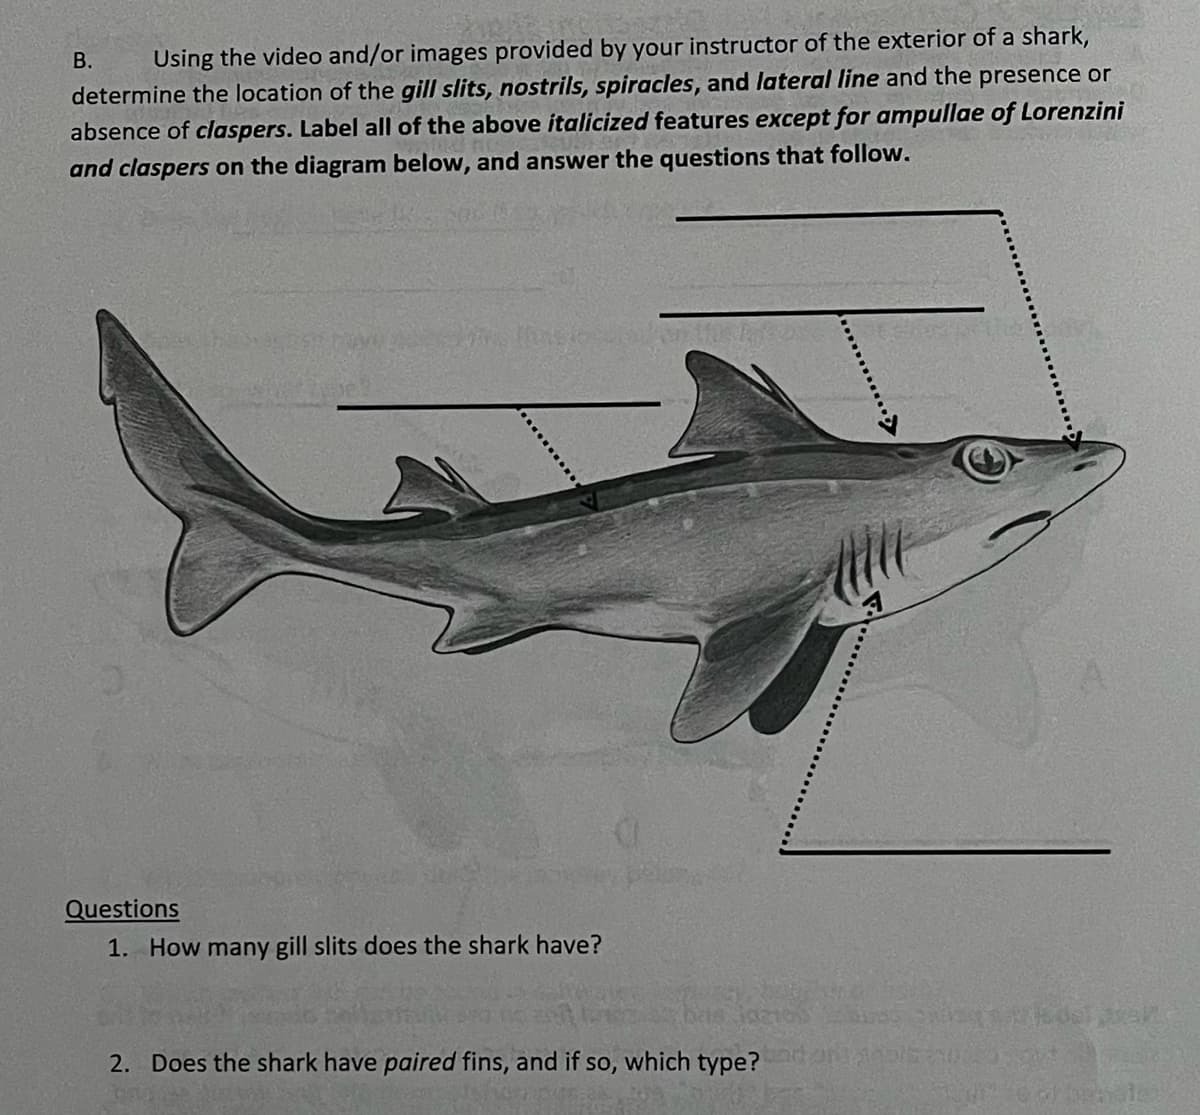 В.
Using the video and/or images provided by your instructor of the exterior of a shark,
determine the location of the gill slits, nostrils, spiracles, and lateral line and the presence or
absence of claspers. Label all of the above italicized features except for ampullae of Lorenzini
and claspers on the diagram below, and answer the questions that follow.
Questions
1. How many gill slits does the shark have?
2. Does the shark have paired fins, and if so, which type? on
